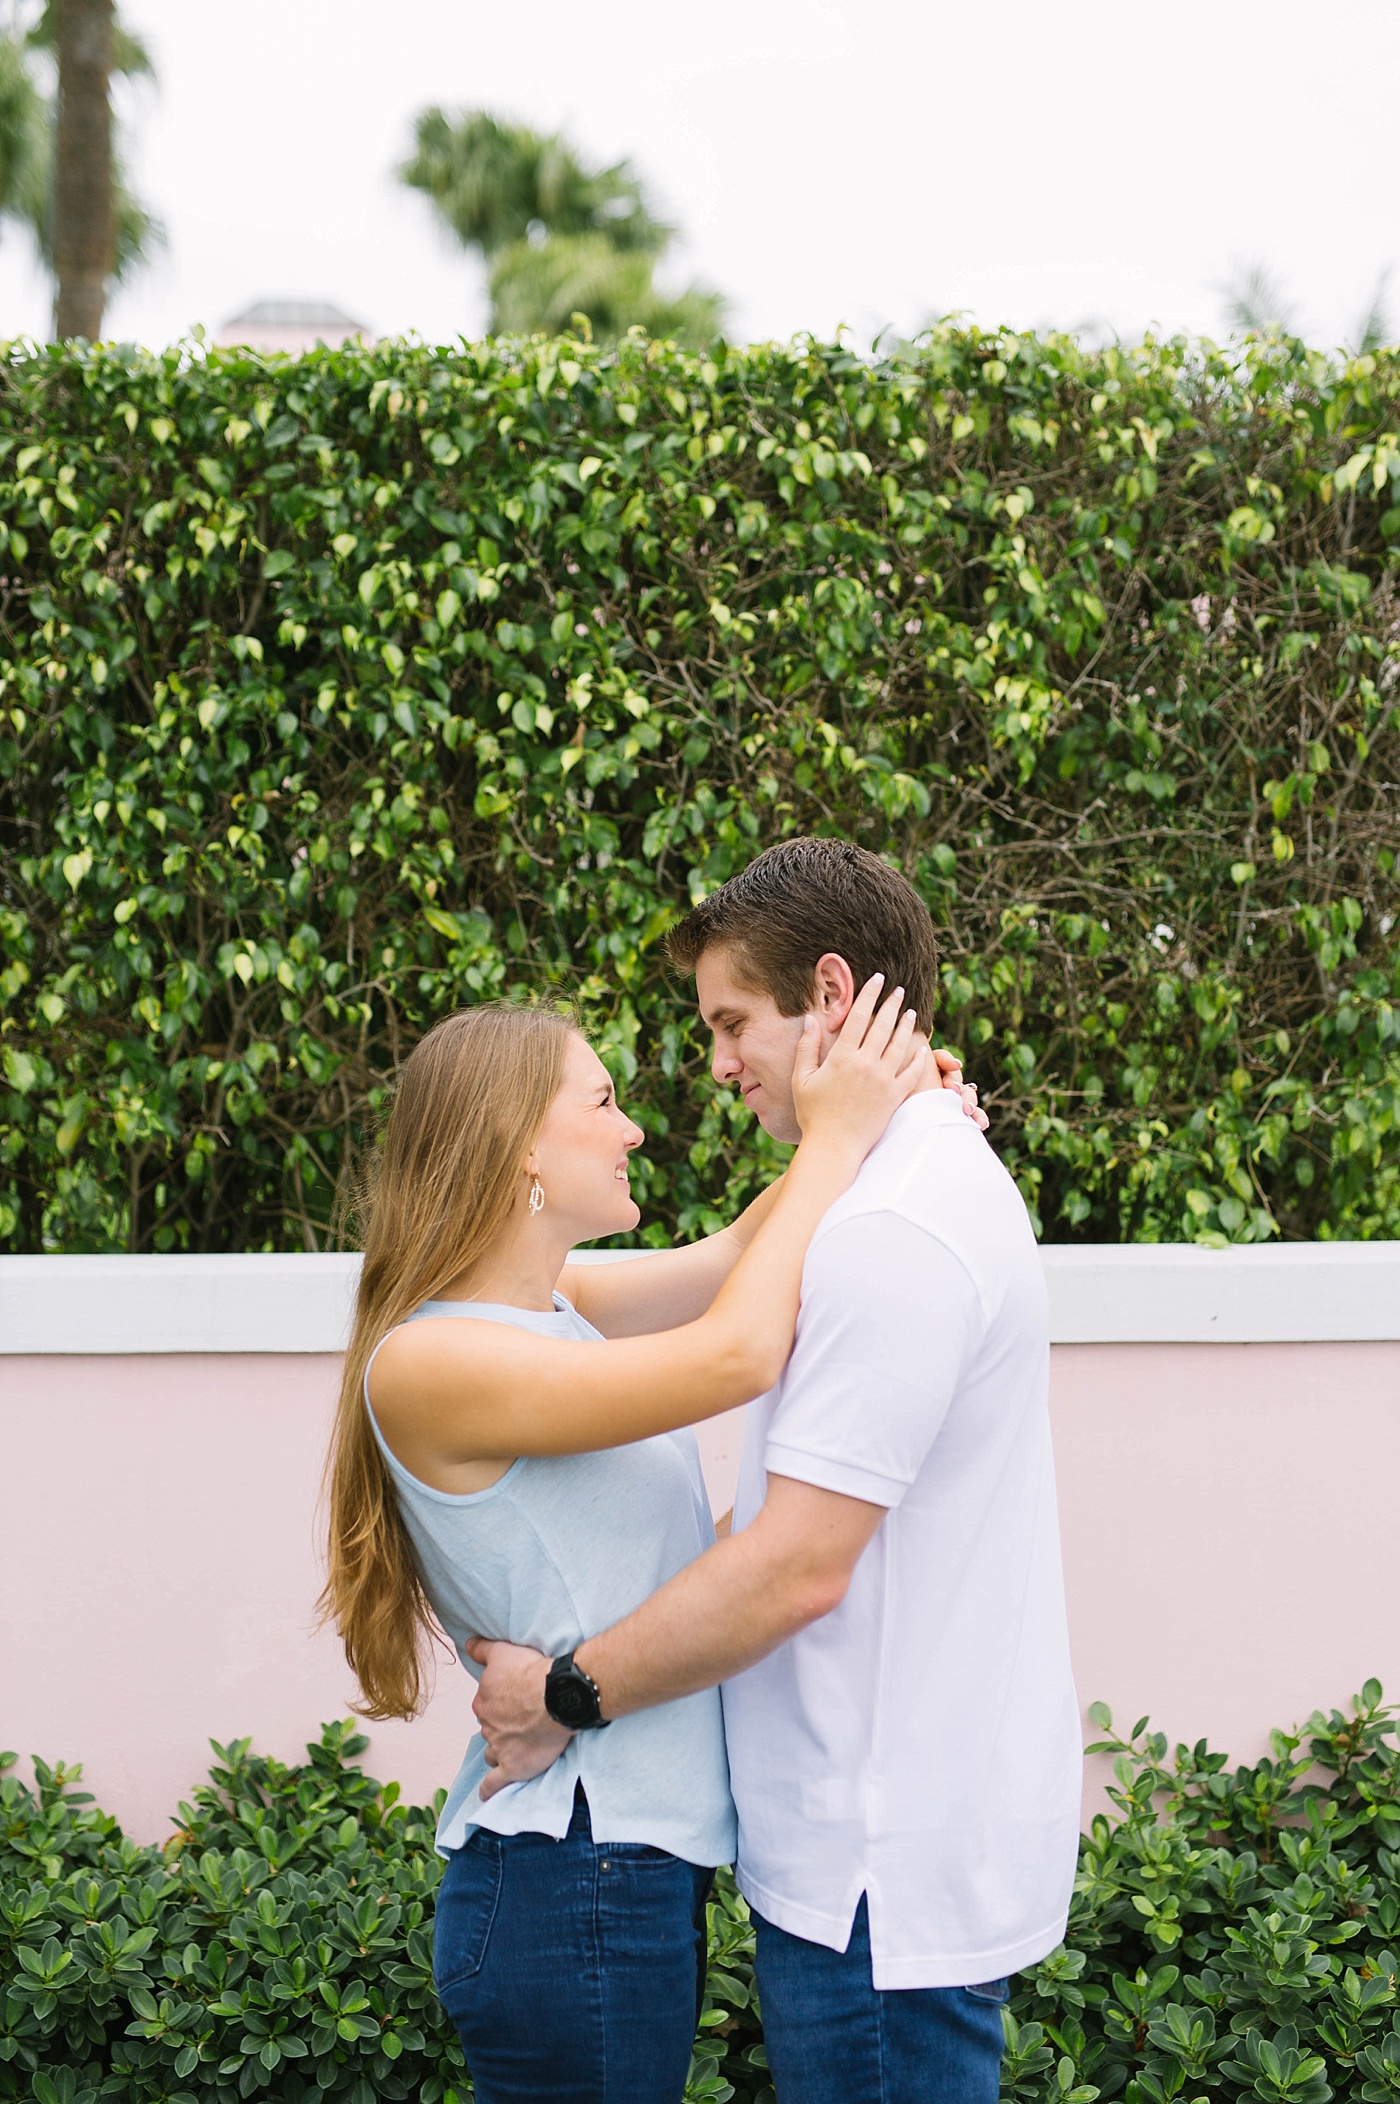 West Palm Beach intracoastal waterway engagement photos